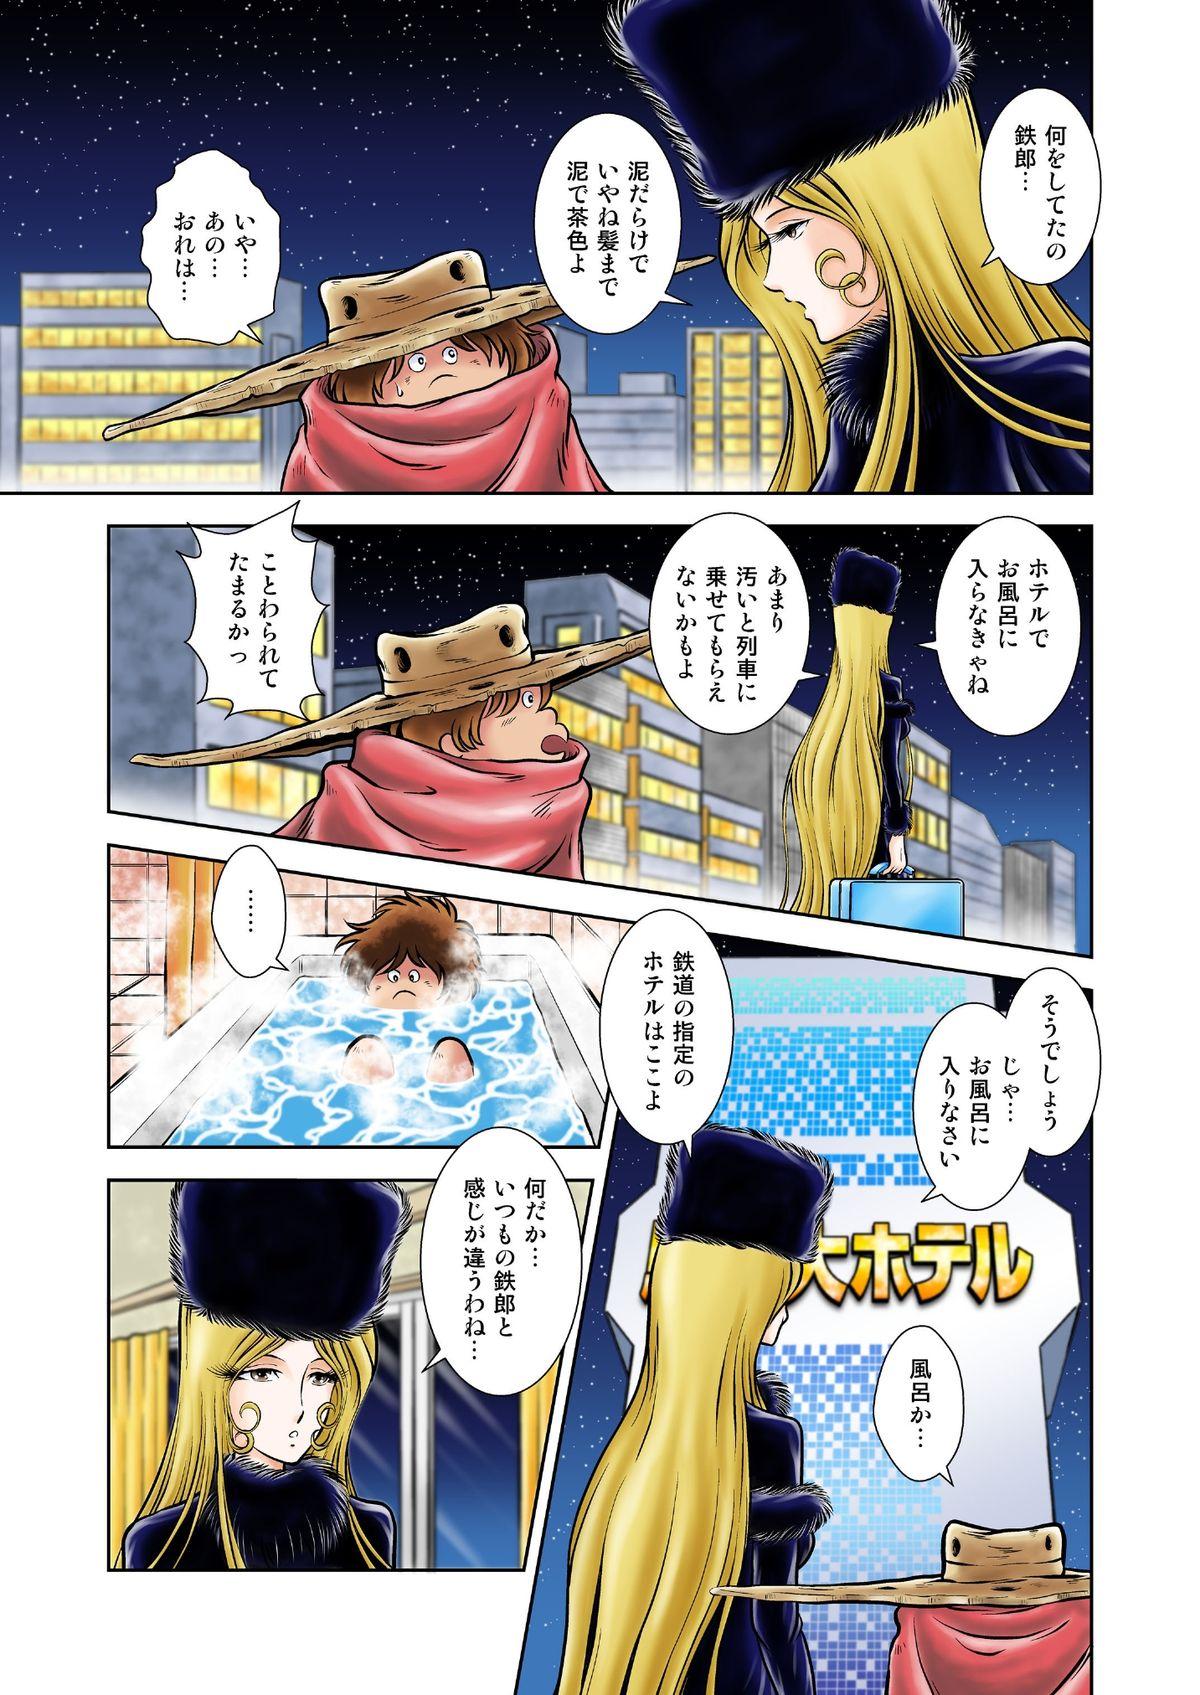 Spanish Maetel Story 15 - Galaxy express 999 Jacking Off - Page 5